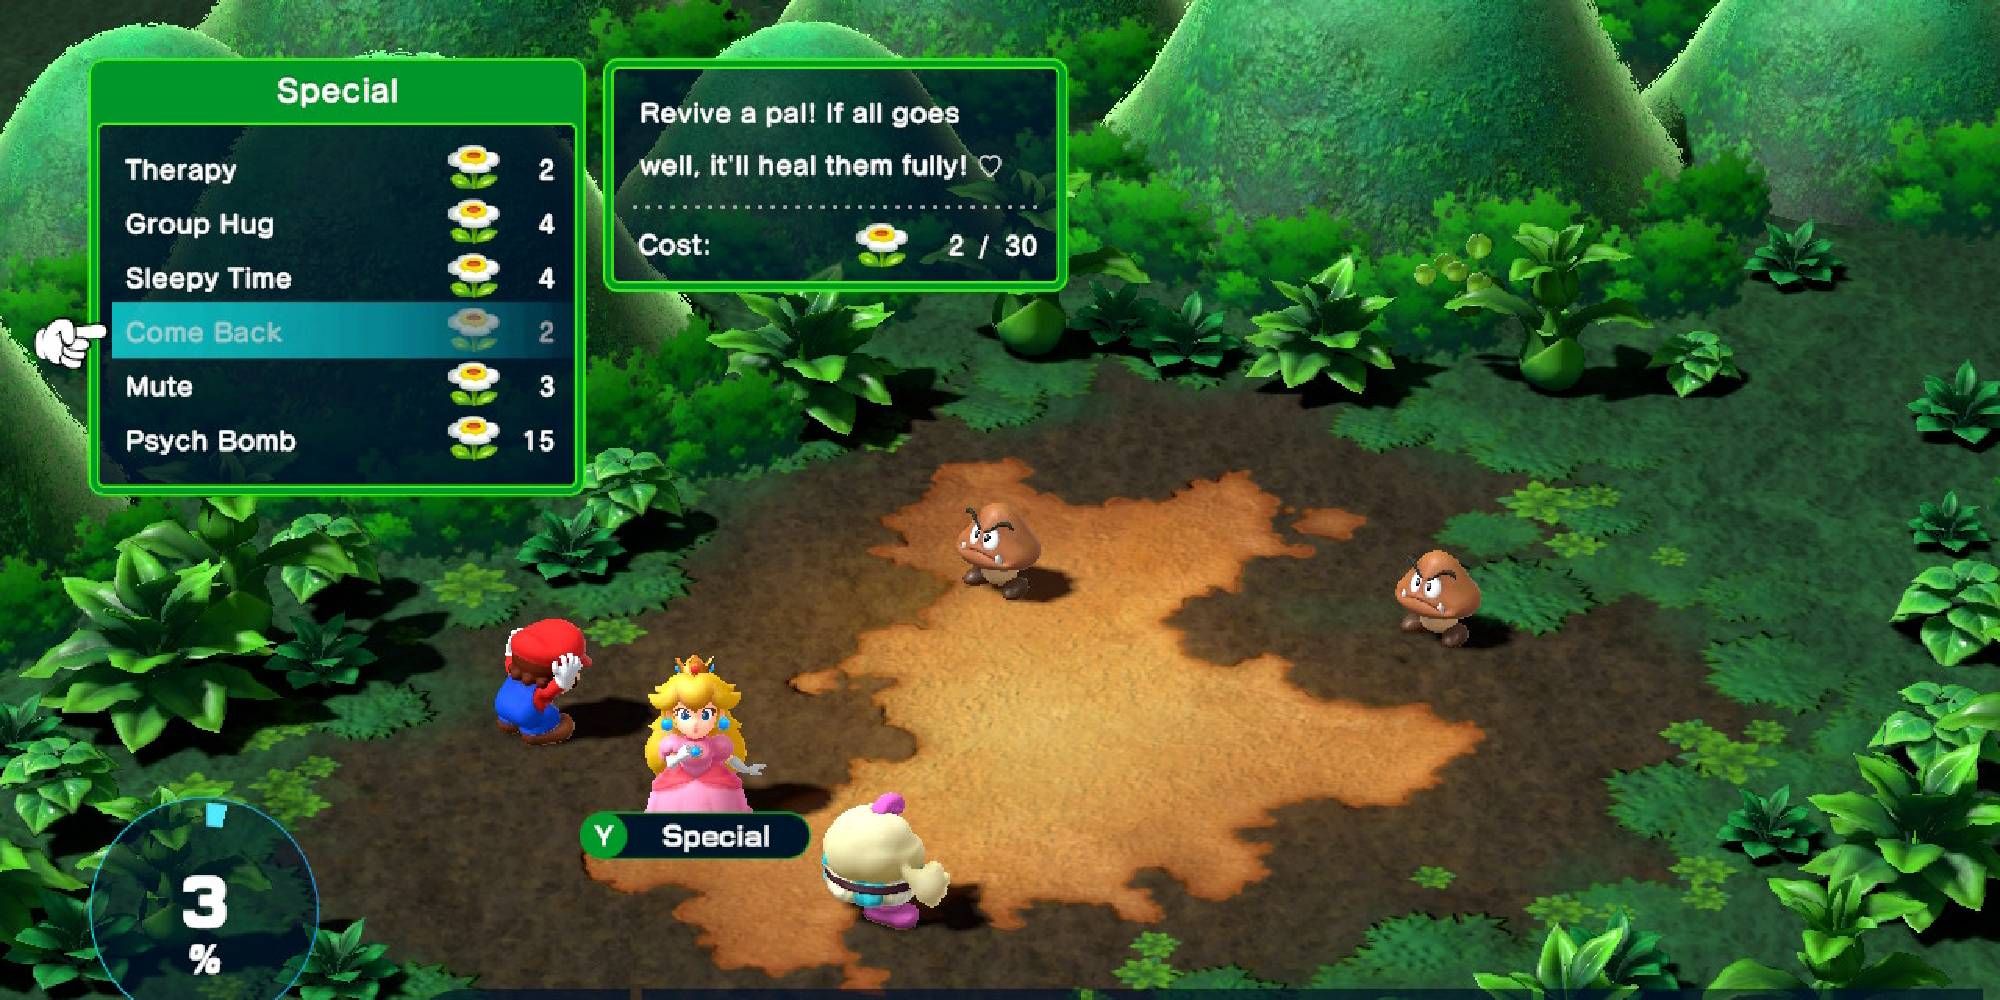 Super Mario RPG review - soothing role-playing goodness